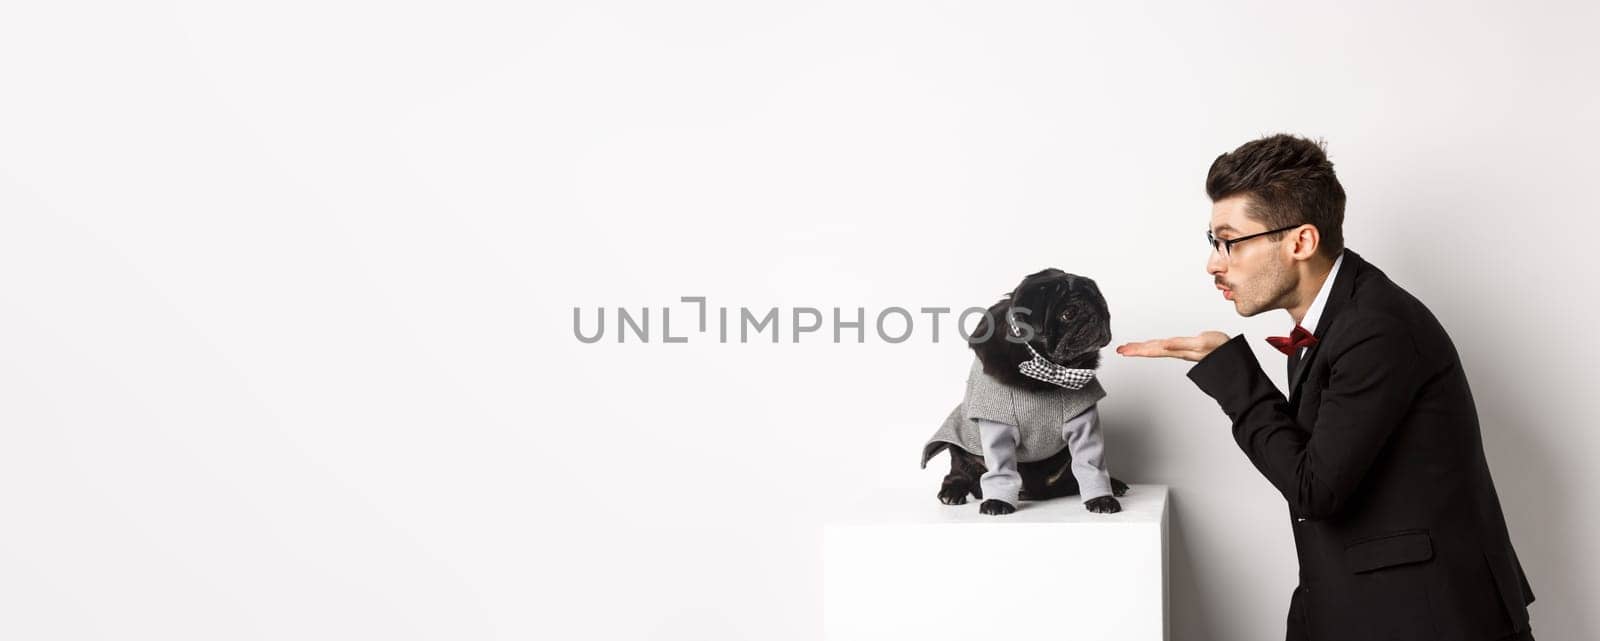 Pets, winter holidays and celebration concept. Handsome young man sending air kiss at cute black puppy wearing costume for New Year, owner standing in suit over white background.